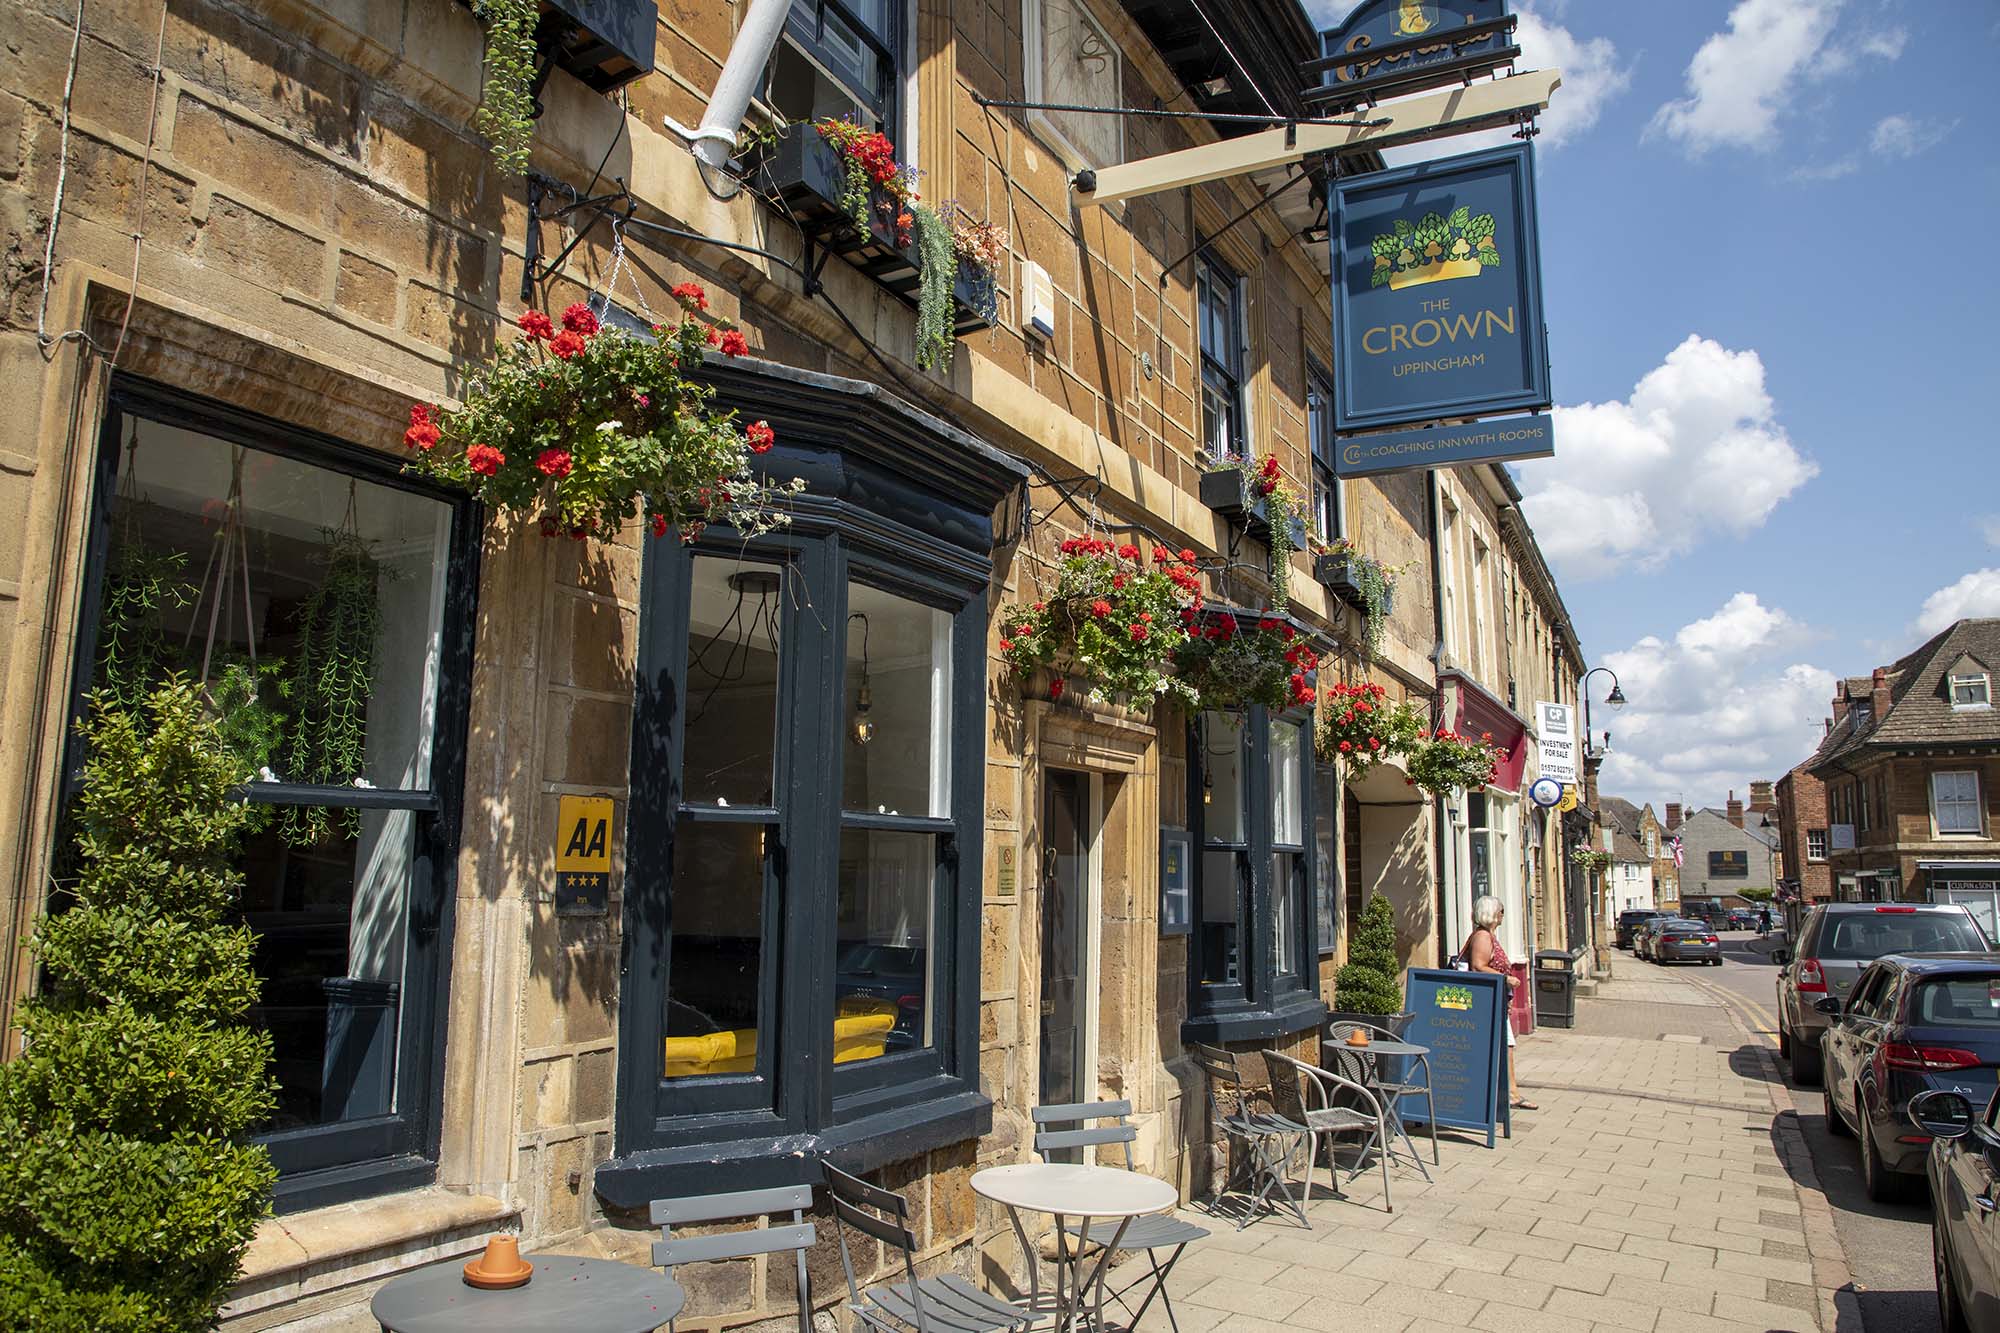 The Crown at Uppingham